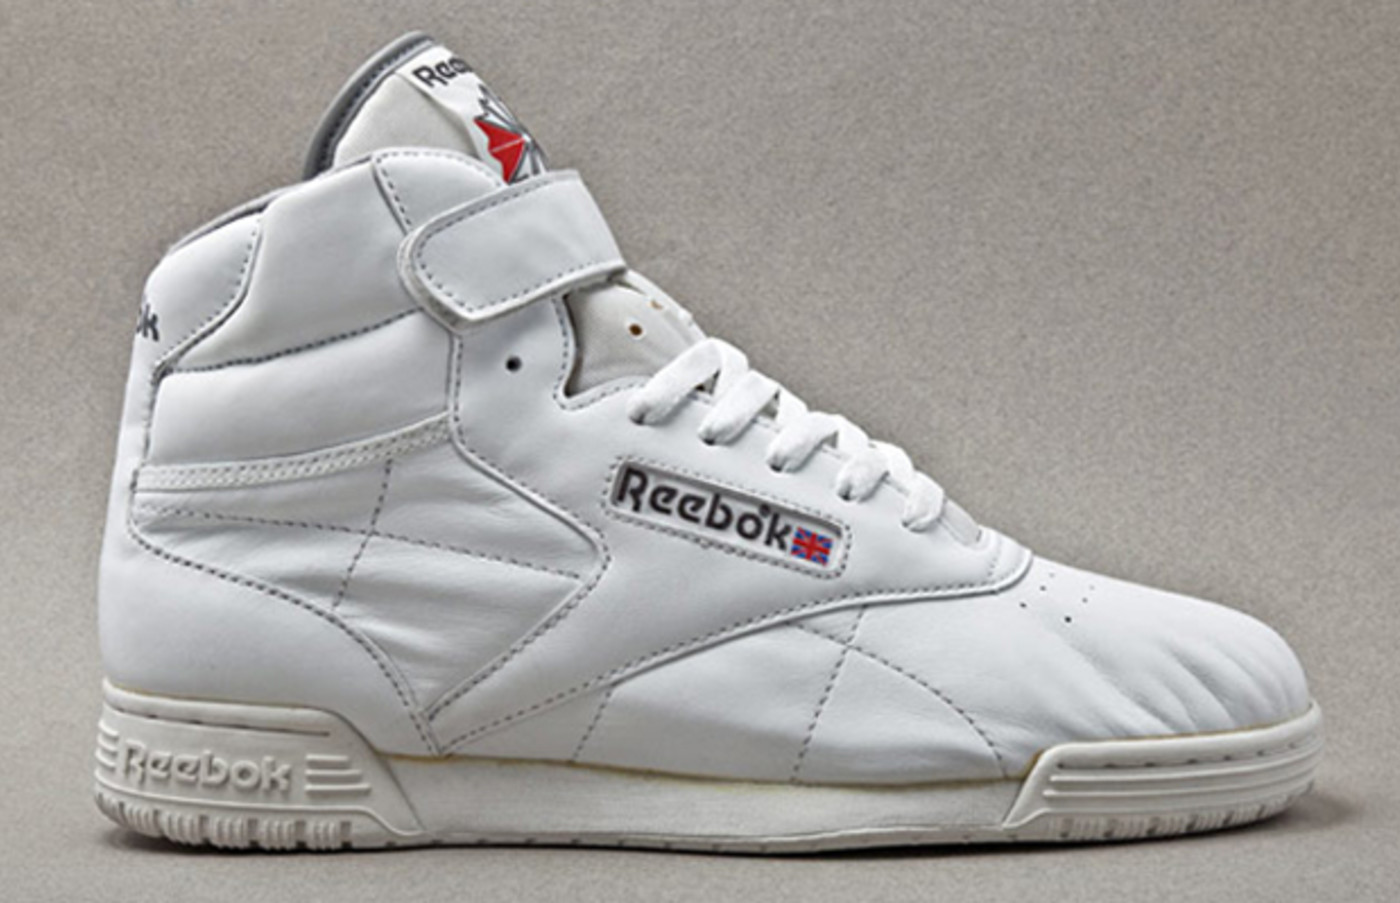 reeboks from the 80s